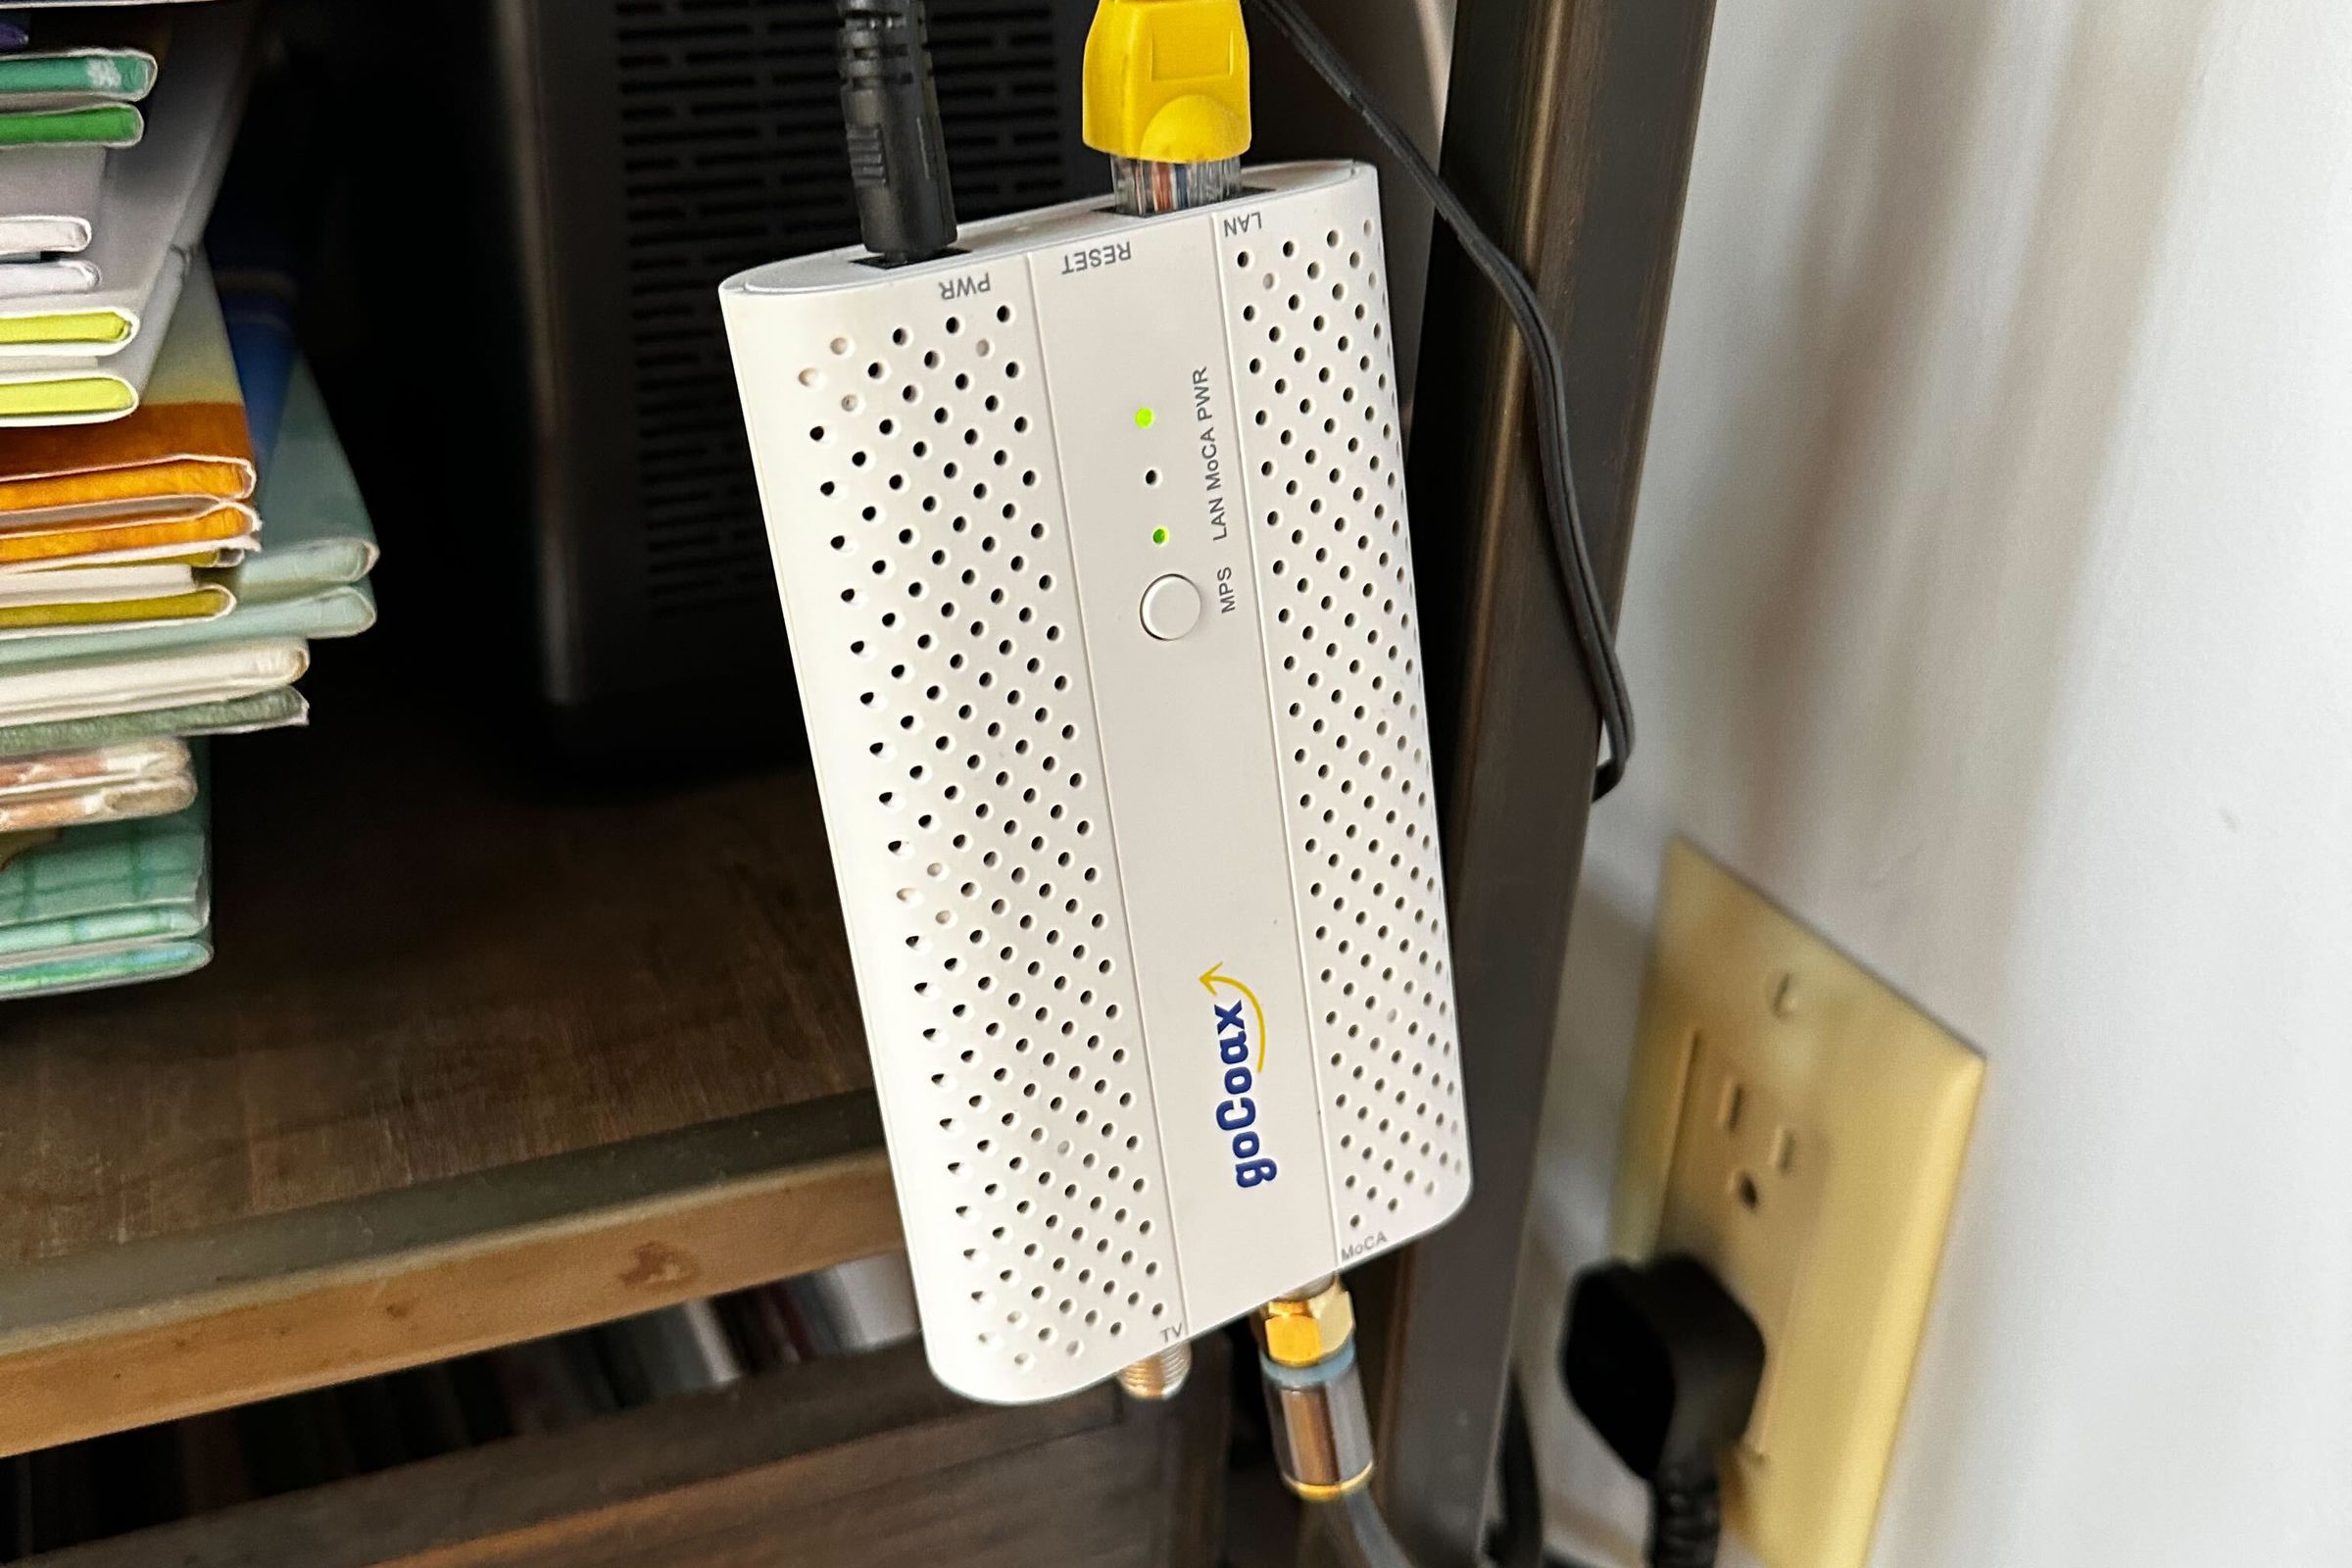 tech news shot of a white MoCA adapter labelled “goCoax” with ethernet and power cables emerging from the top and a coax cable coming from the bottom. The adapter is dangling in midair in front of a bookshelf, with a power outlet visible in the background. 